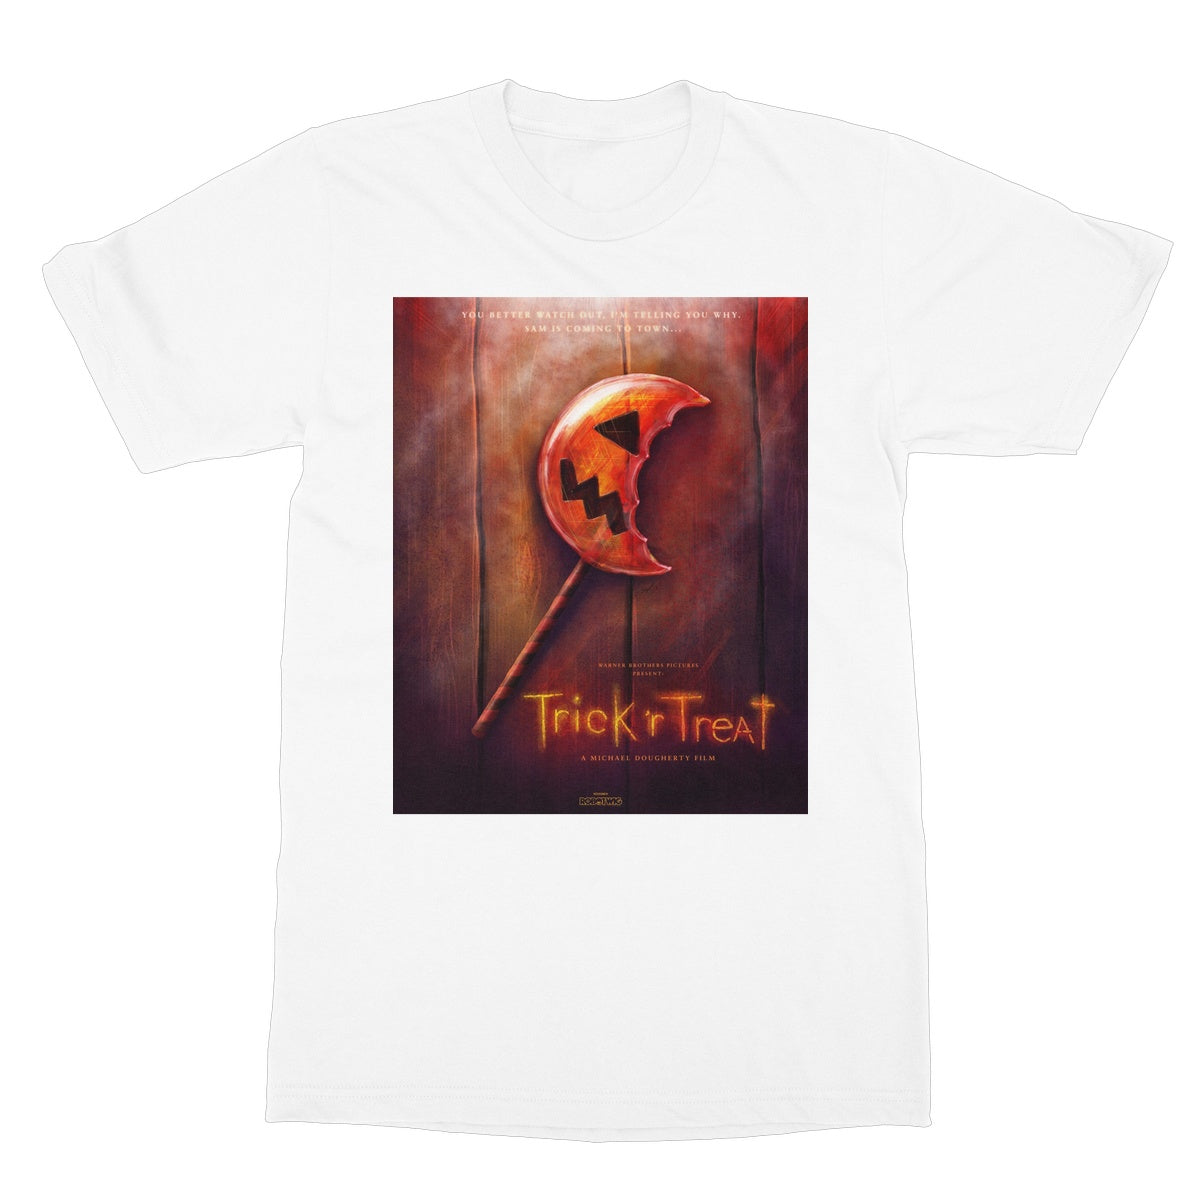 TrickrTreat Illustrated Softstyle T-Shirt